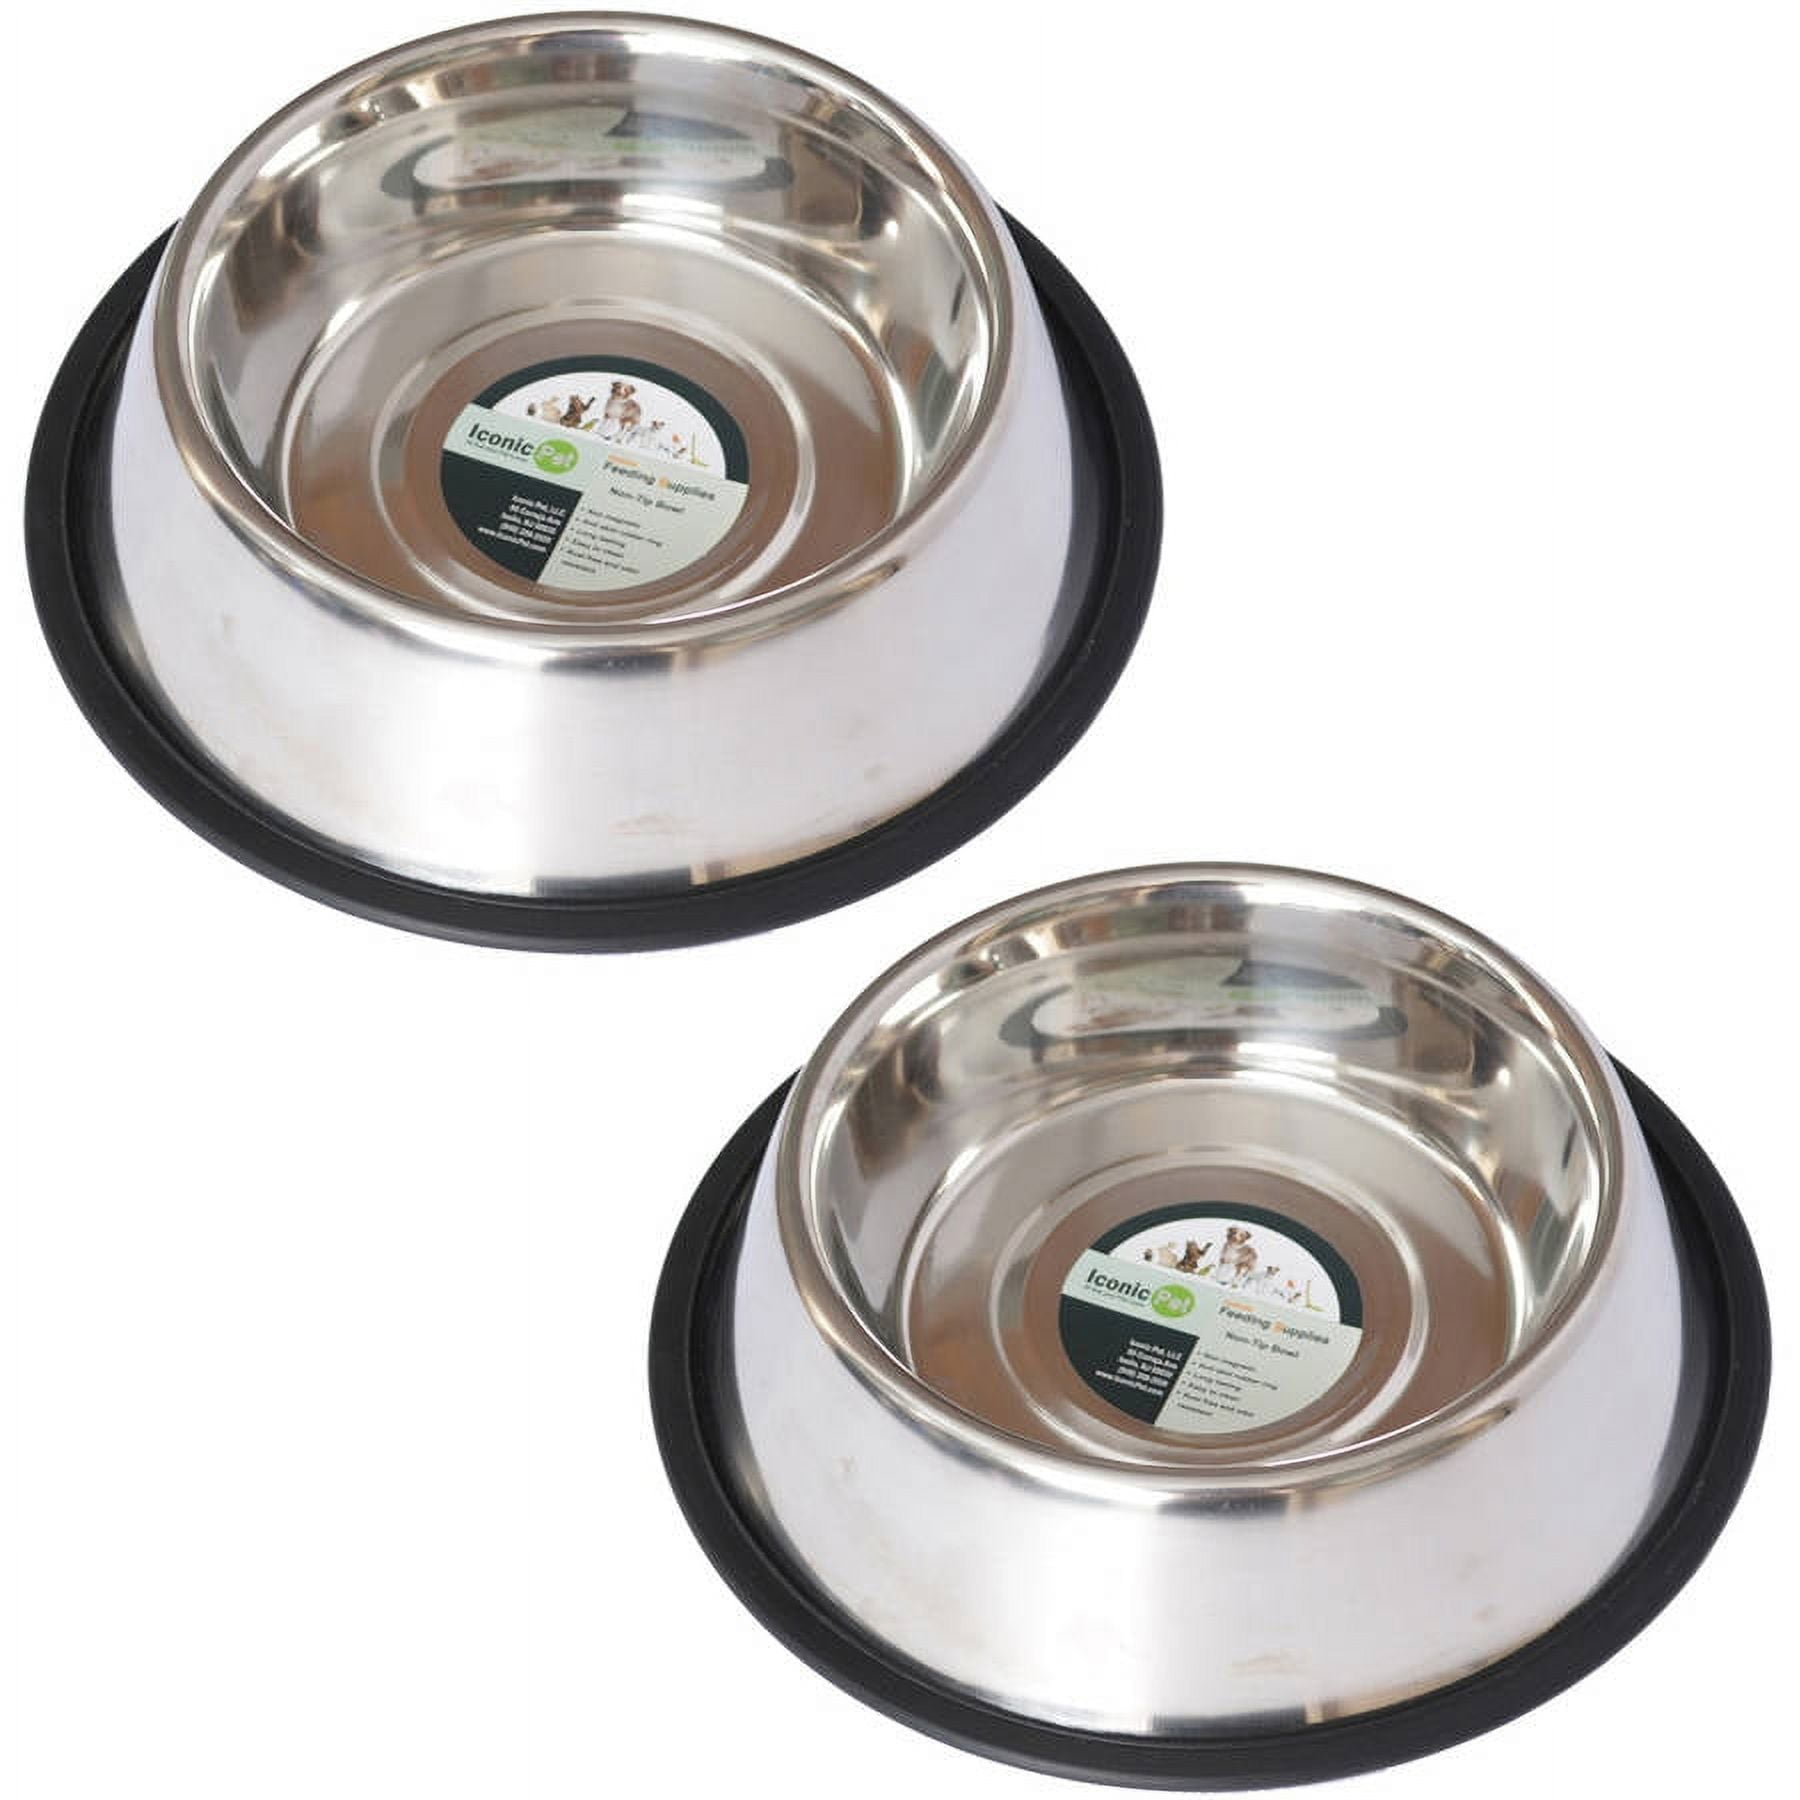 16 Oz Stainless Steel Non-skid Pet Bowl For Dog Or Cat, Pack Of 2